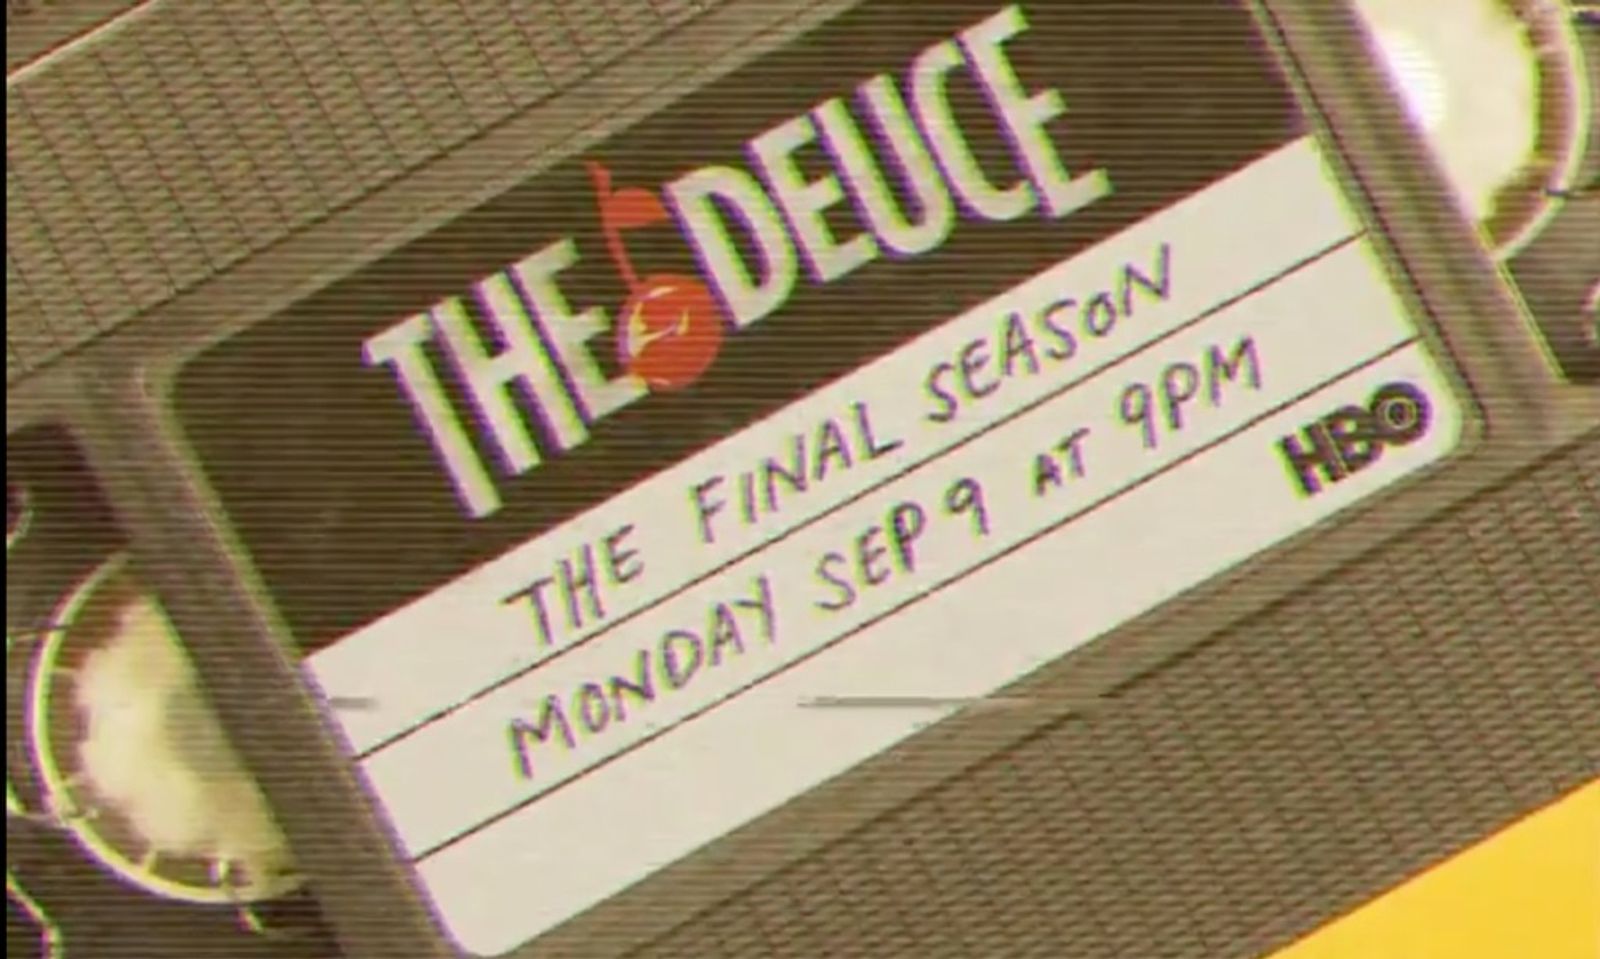 HBO Sets Premiere Date for Final Season of Porn Drama ‘The Deuce’